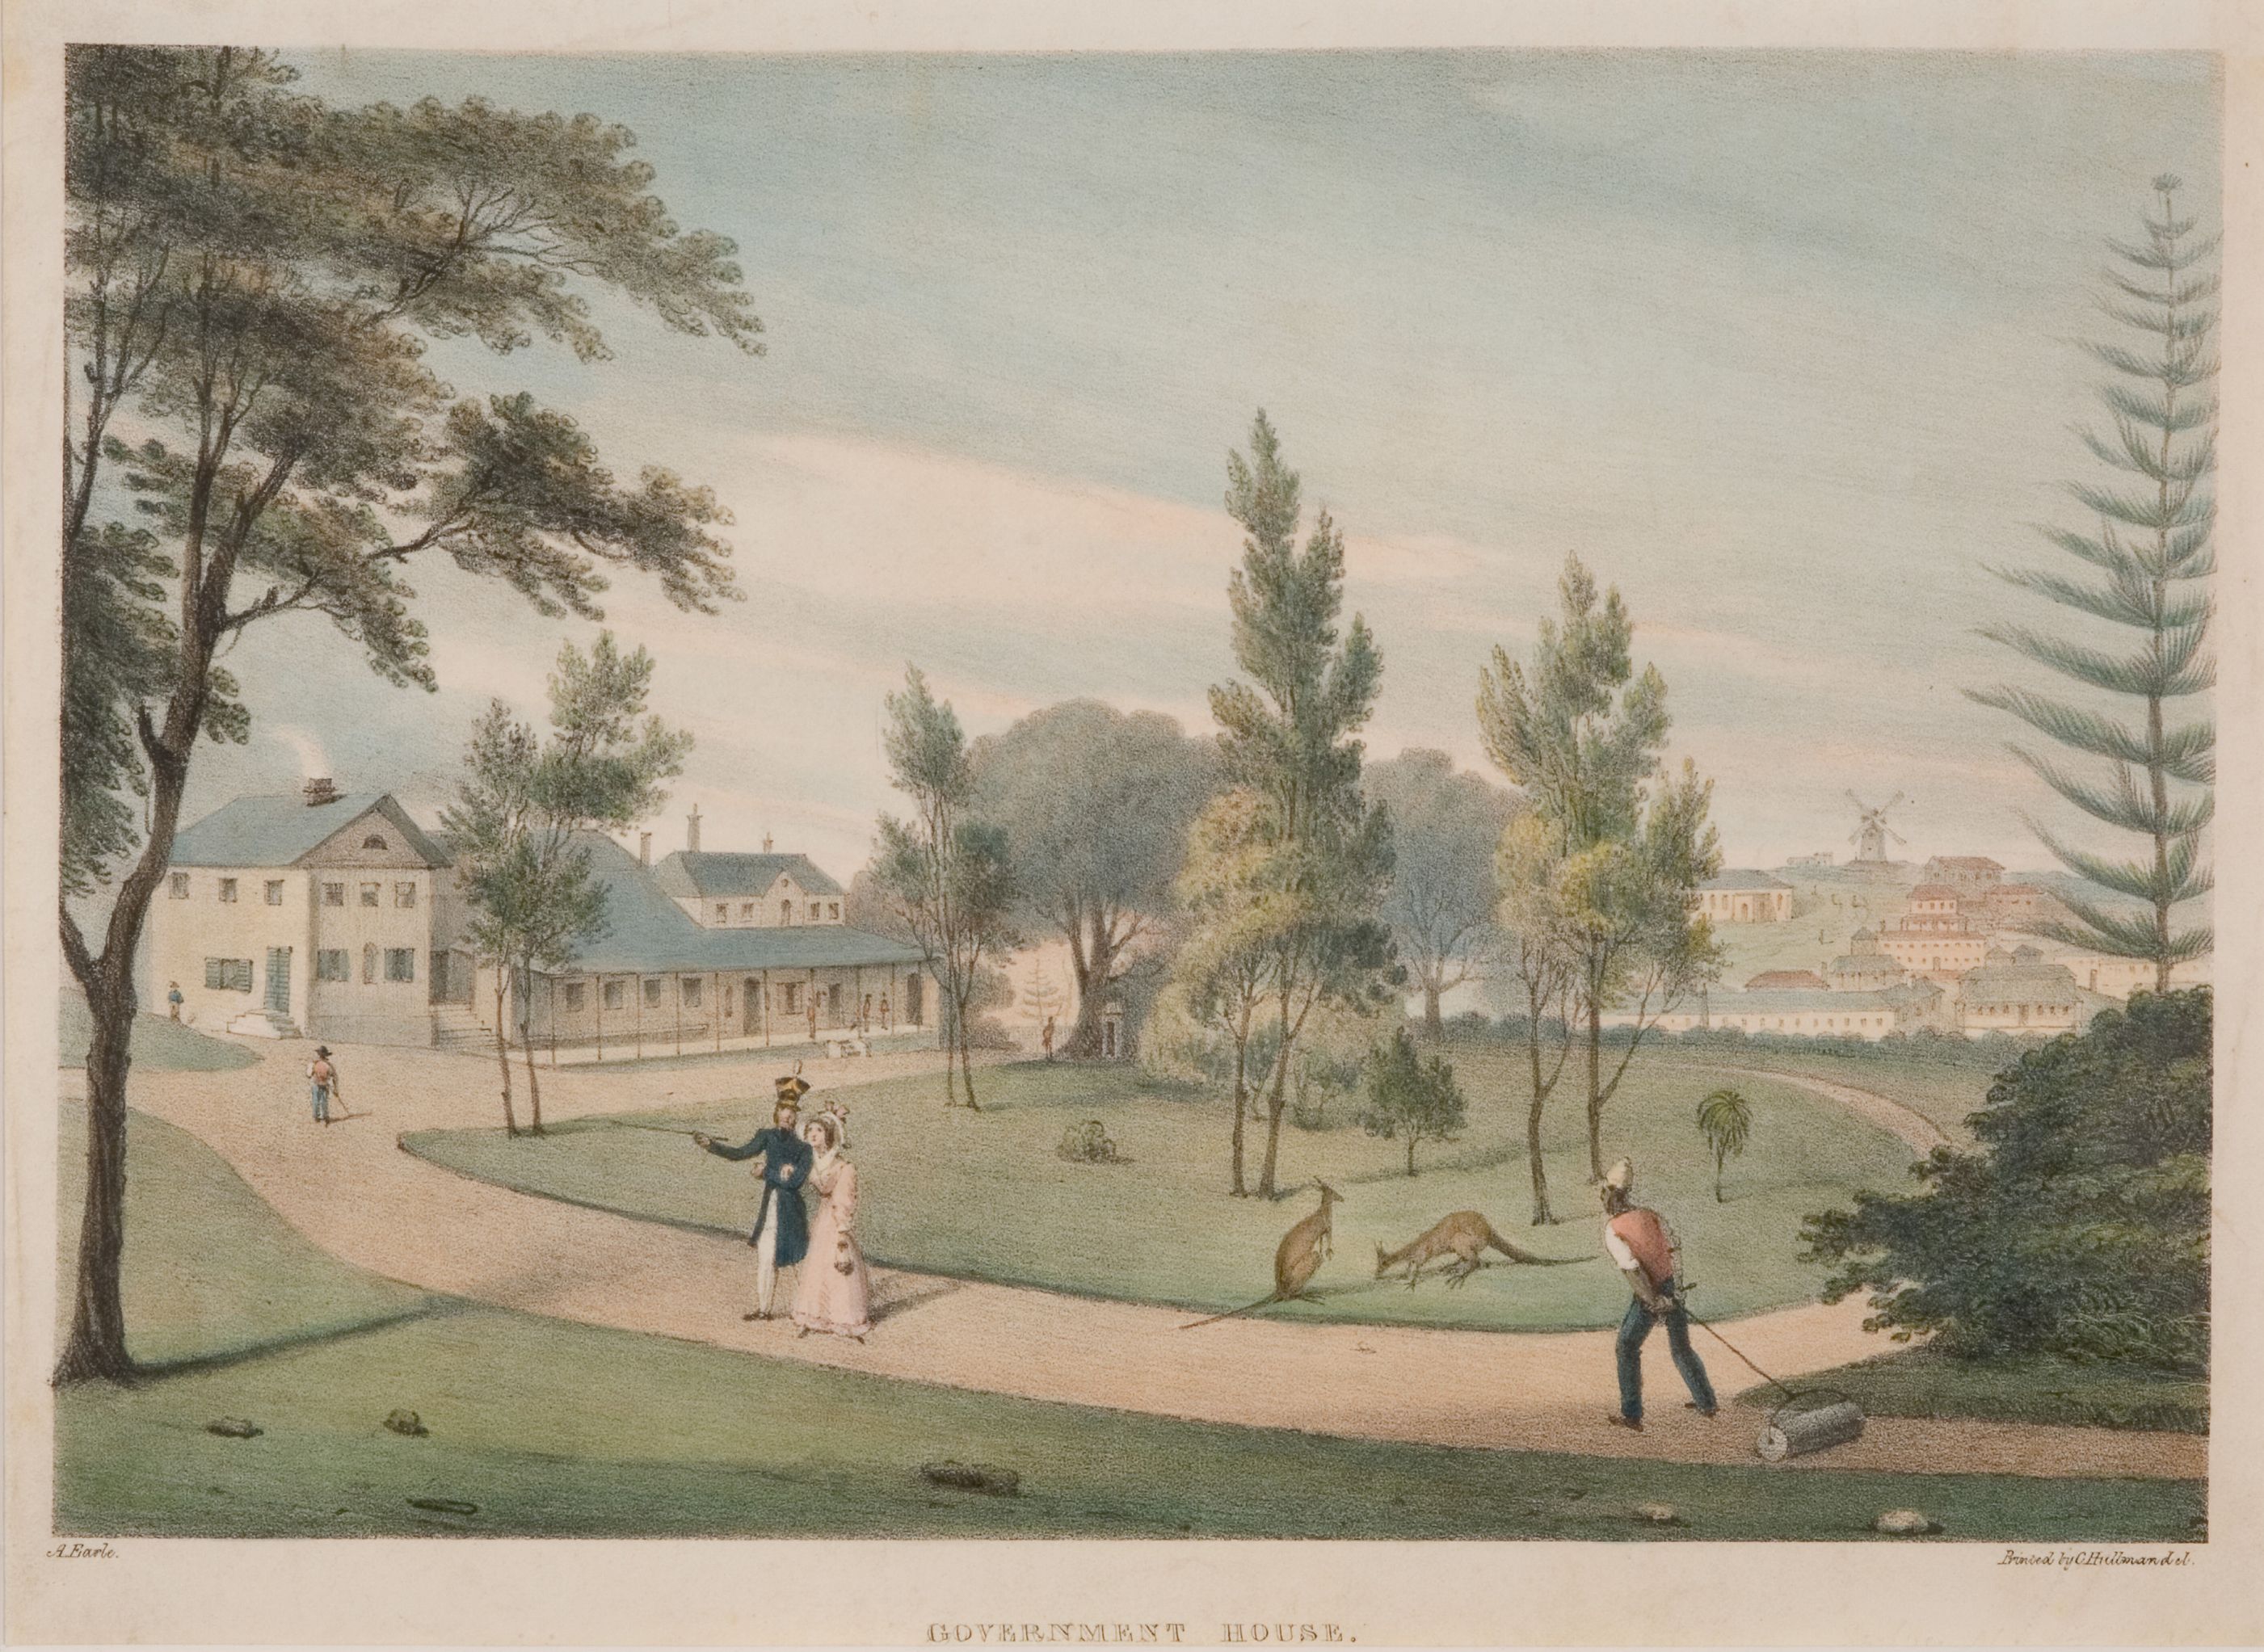 Painting of the garden area in front of a large house. Image shows a circular driveway, spare trees and lawn being grazed by kangaroos. 